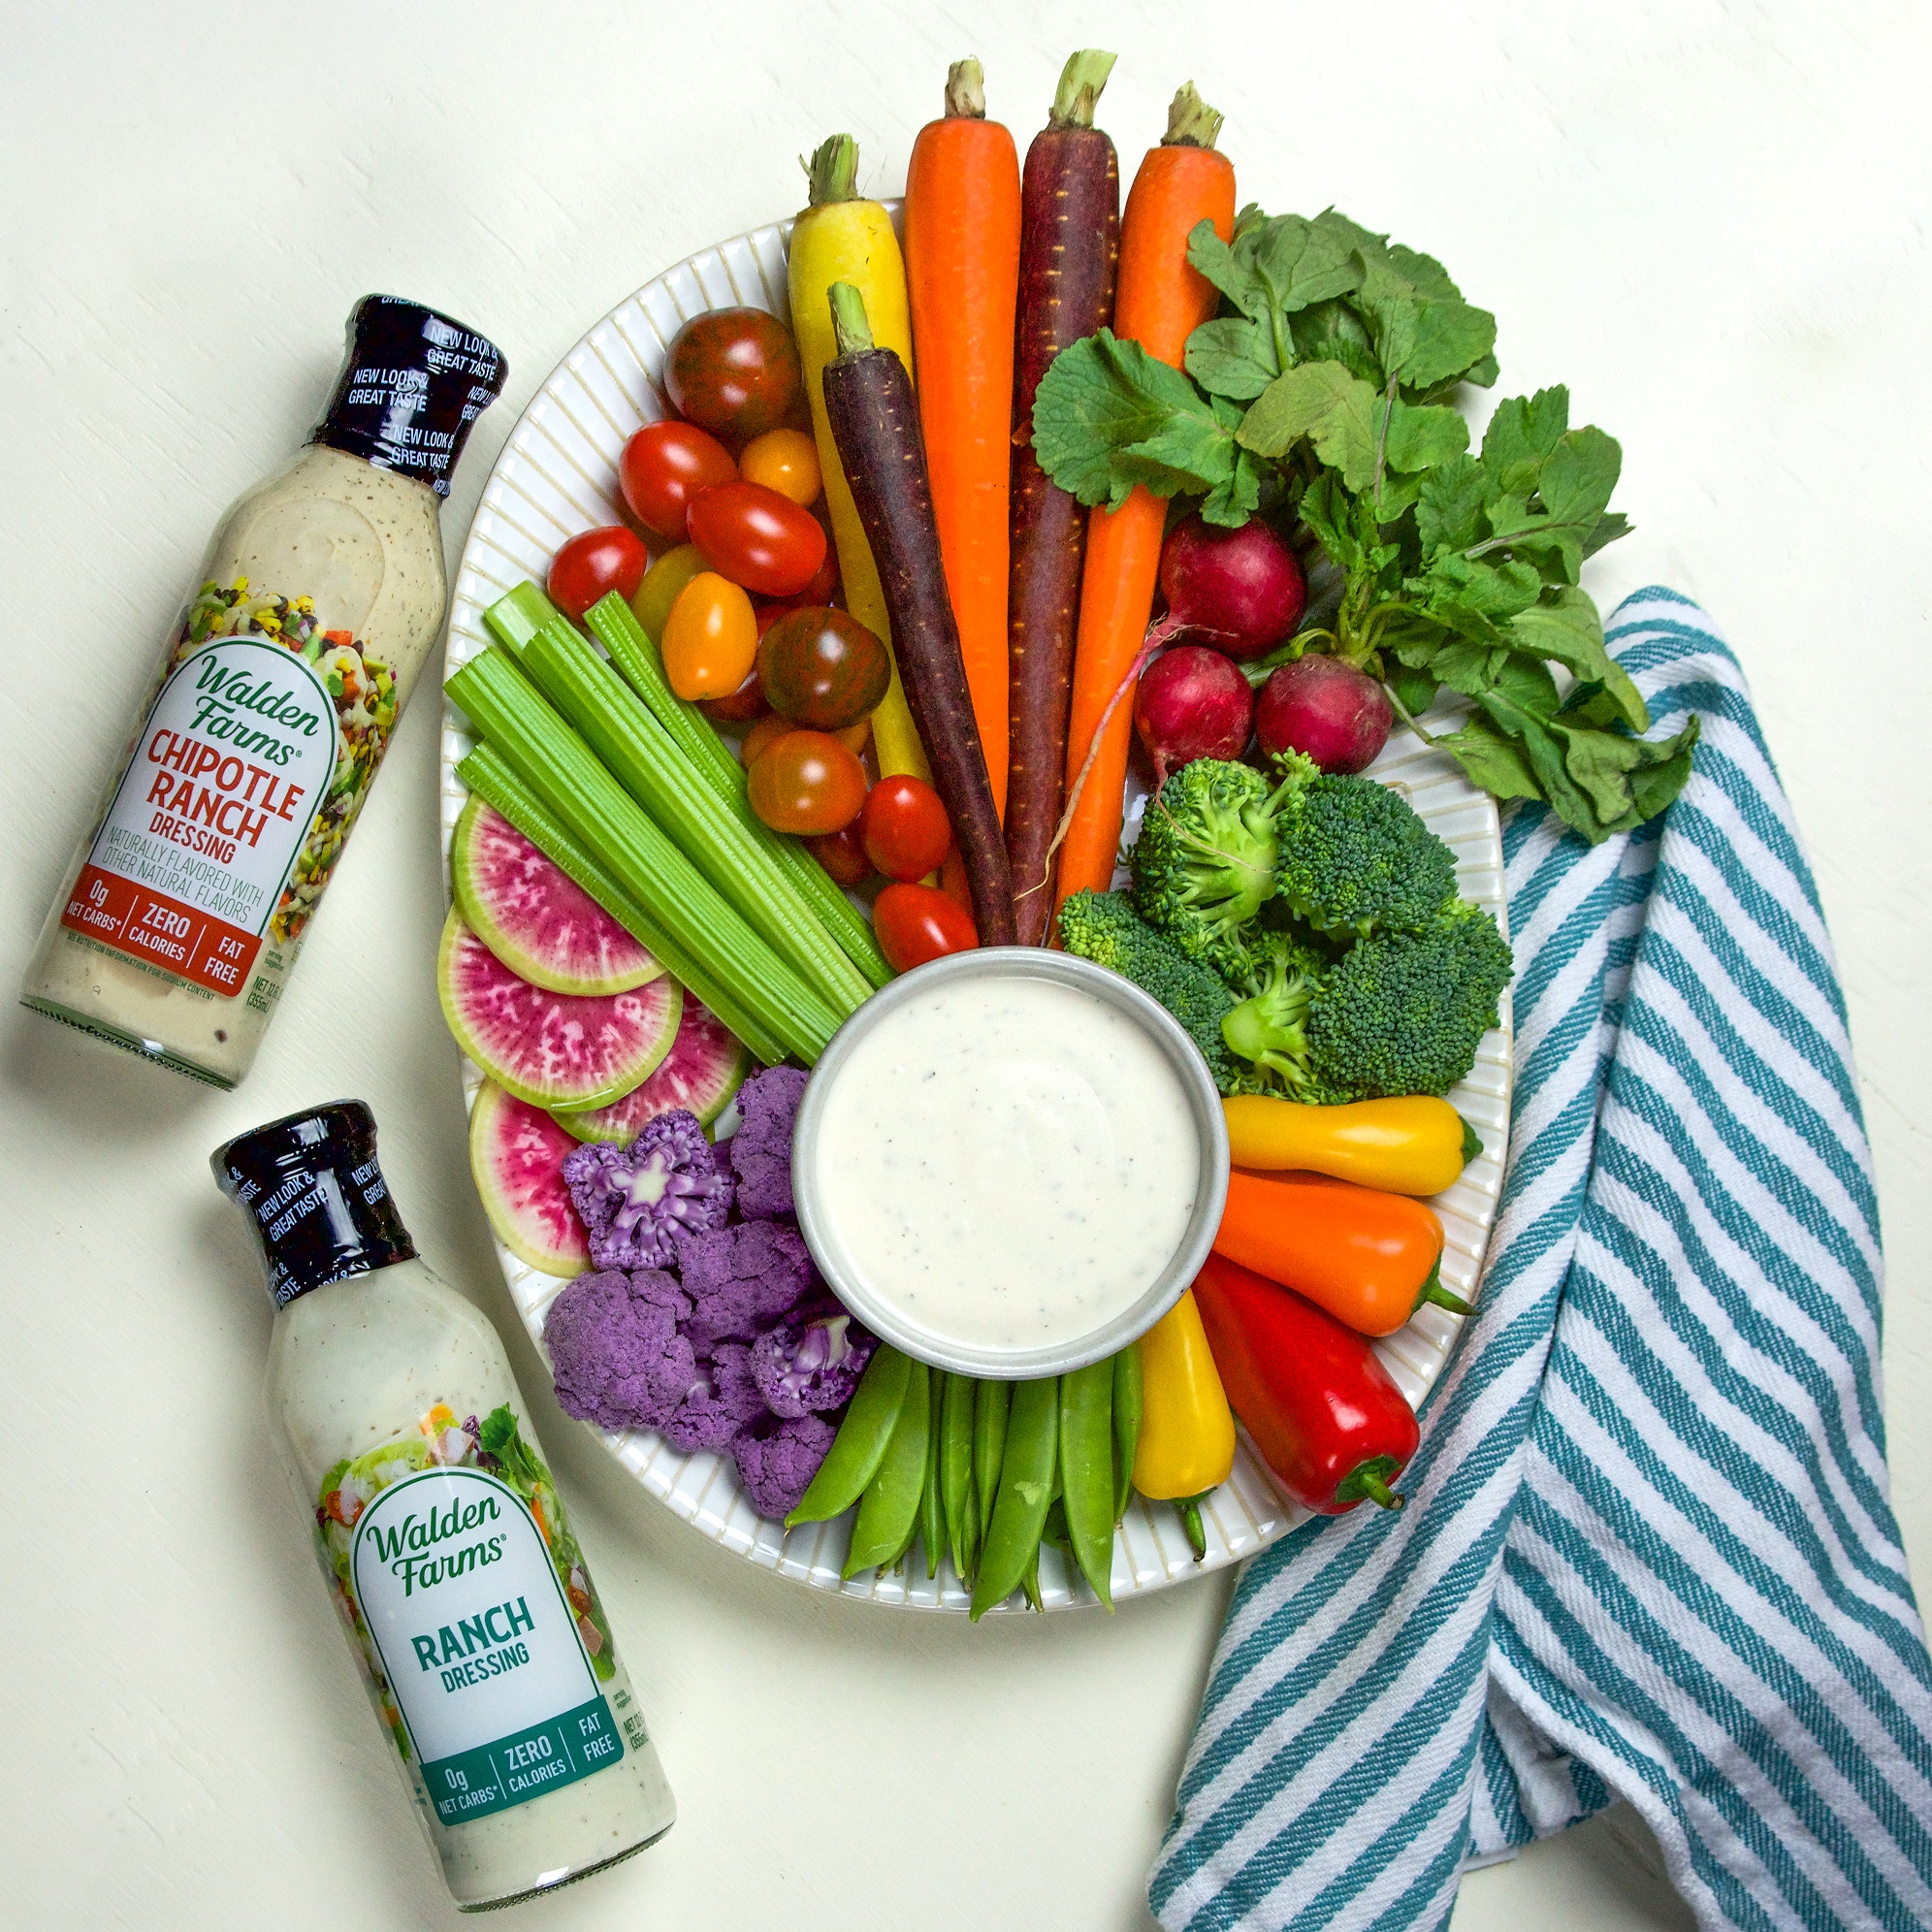 Walden Farms Ranch Dressing, 12 oz. Bottle, Fresh and Delicious Salad Topping, Sugar Free 0g Net Carbs Condiment, Cool and Tangy - image 6 of 7